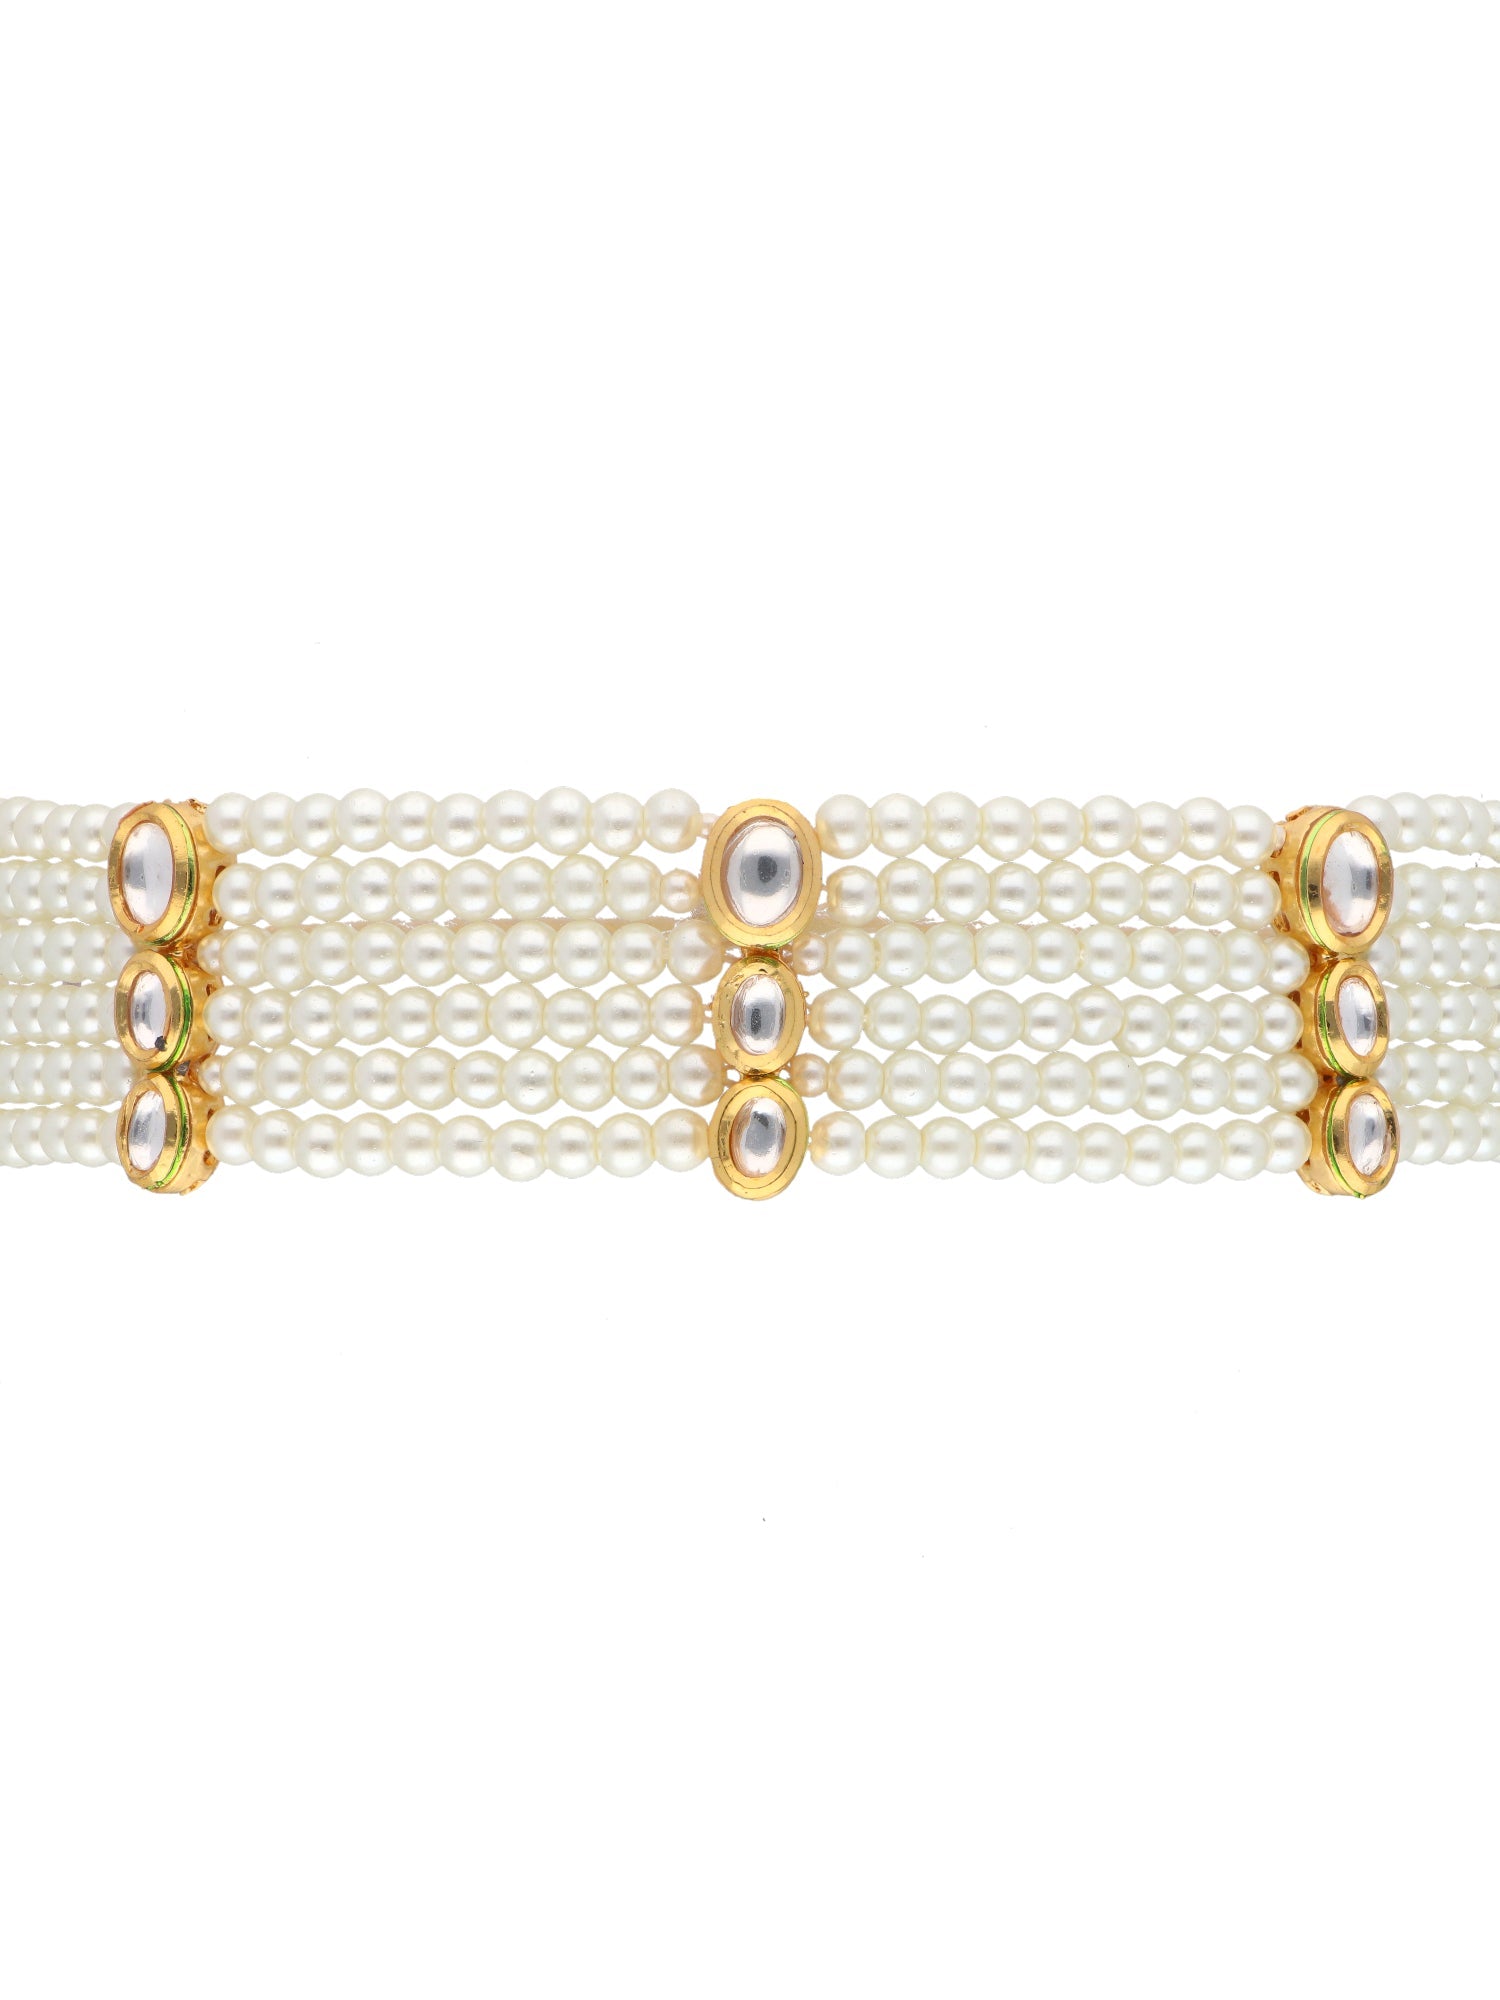 The Zoya Strings of pearls Tushi Choker Necklace 